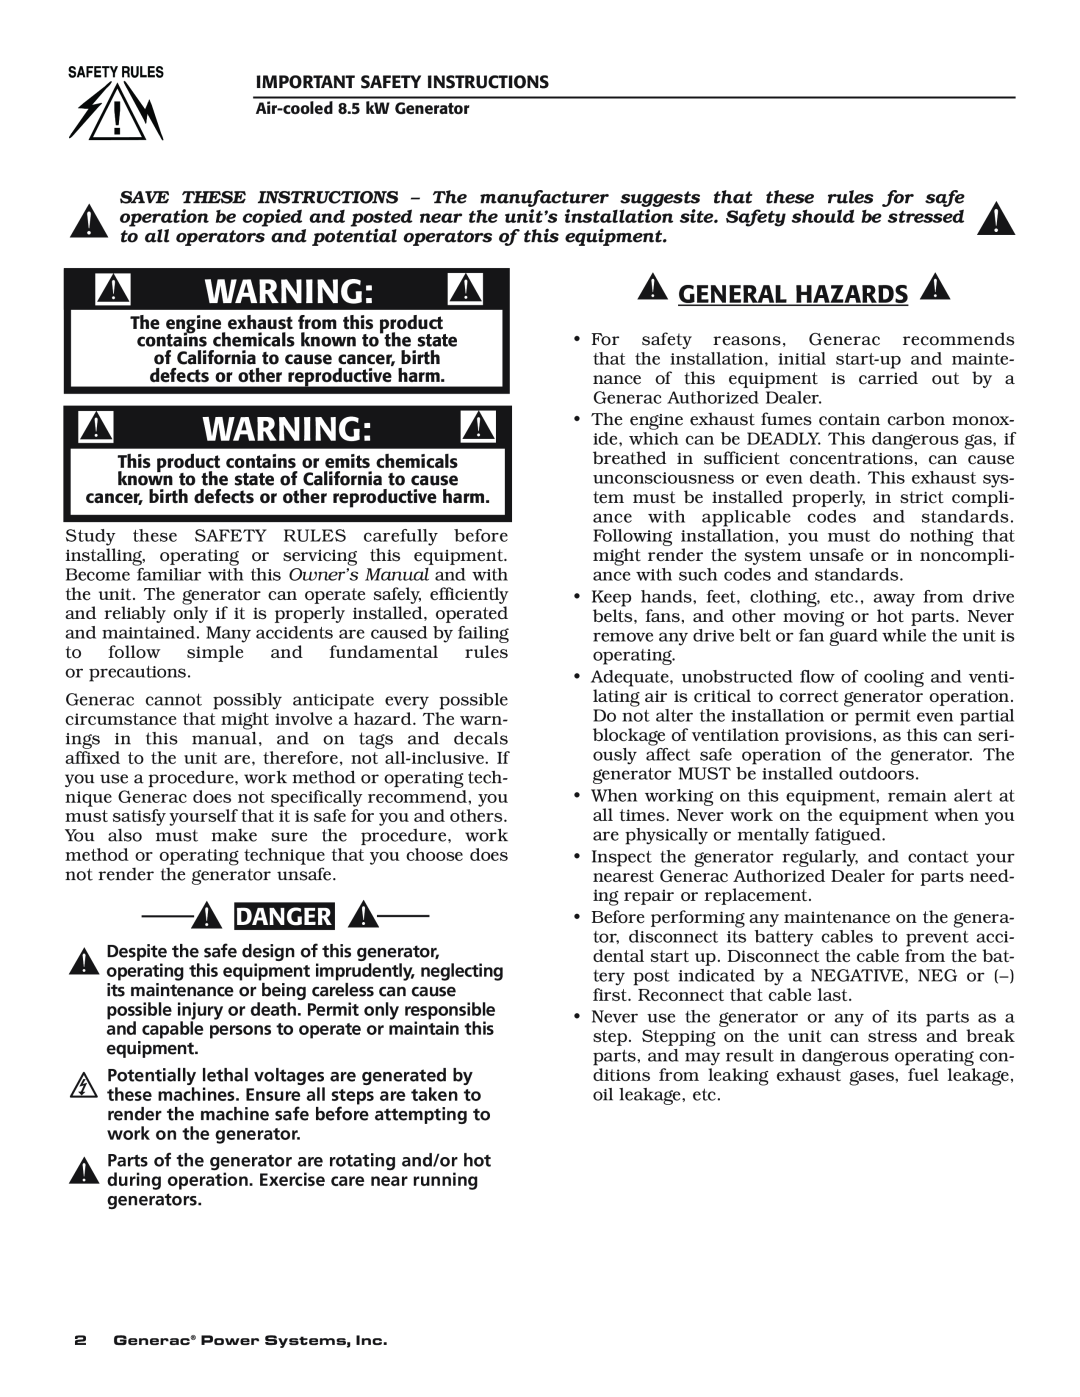 Generac 004692-0 General Hazards, Danger, Save These Instructions, The manufacturer, suggests that these rules for, safe 